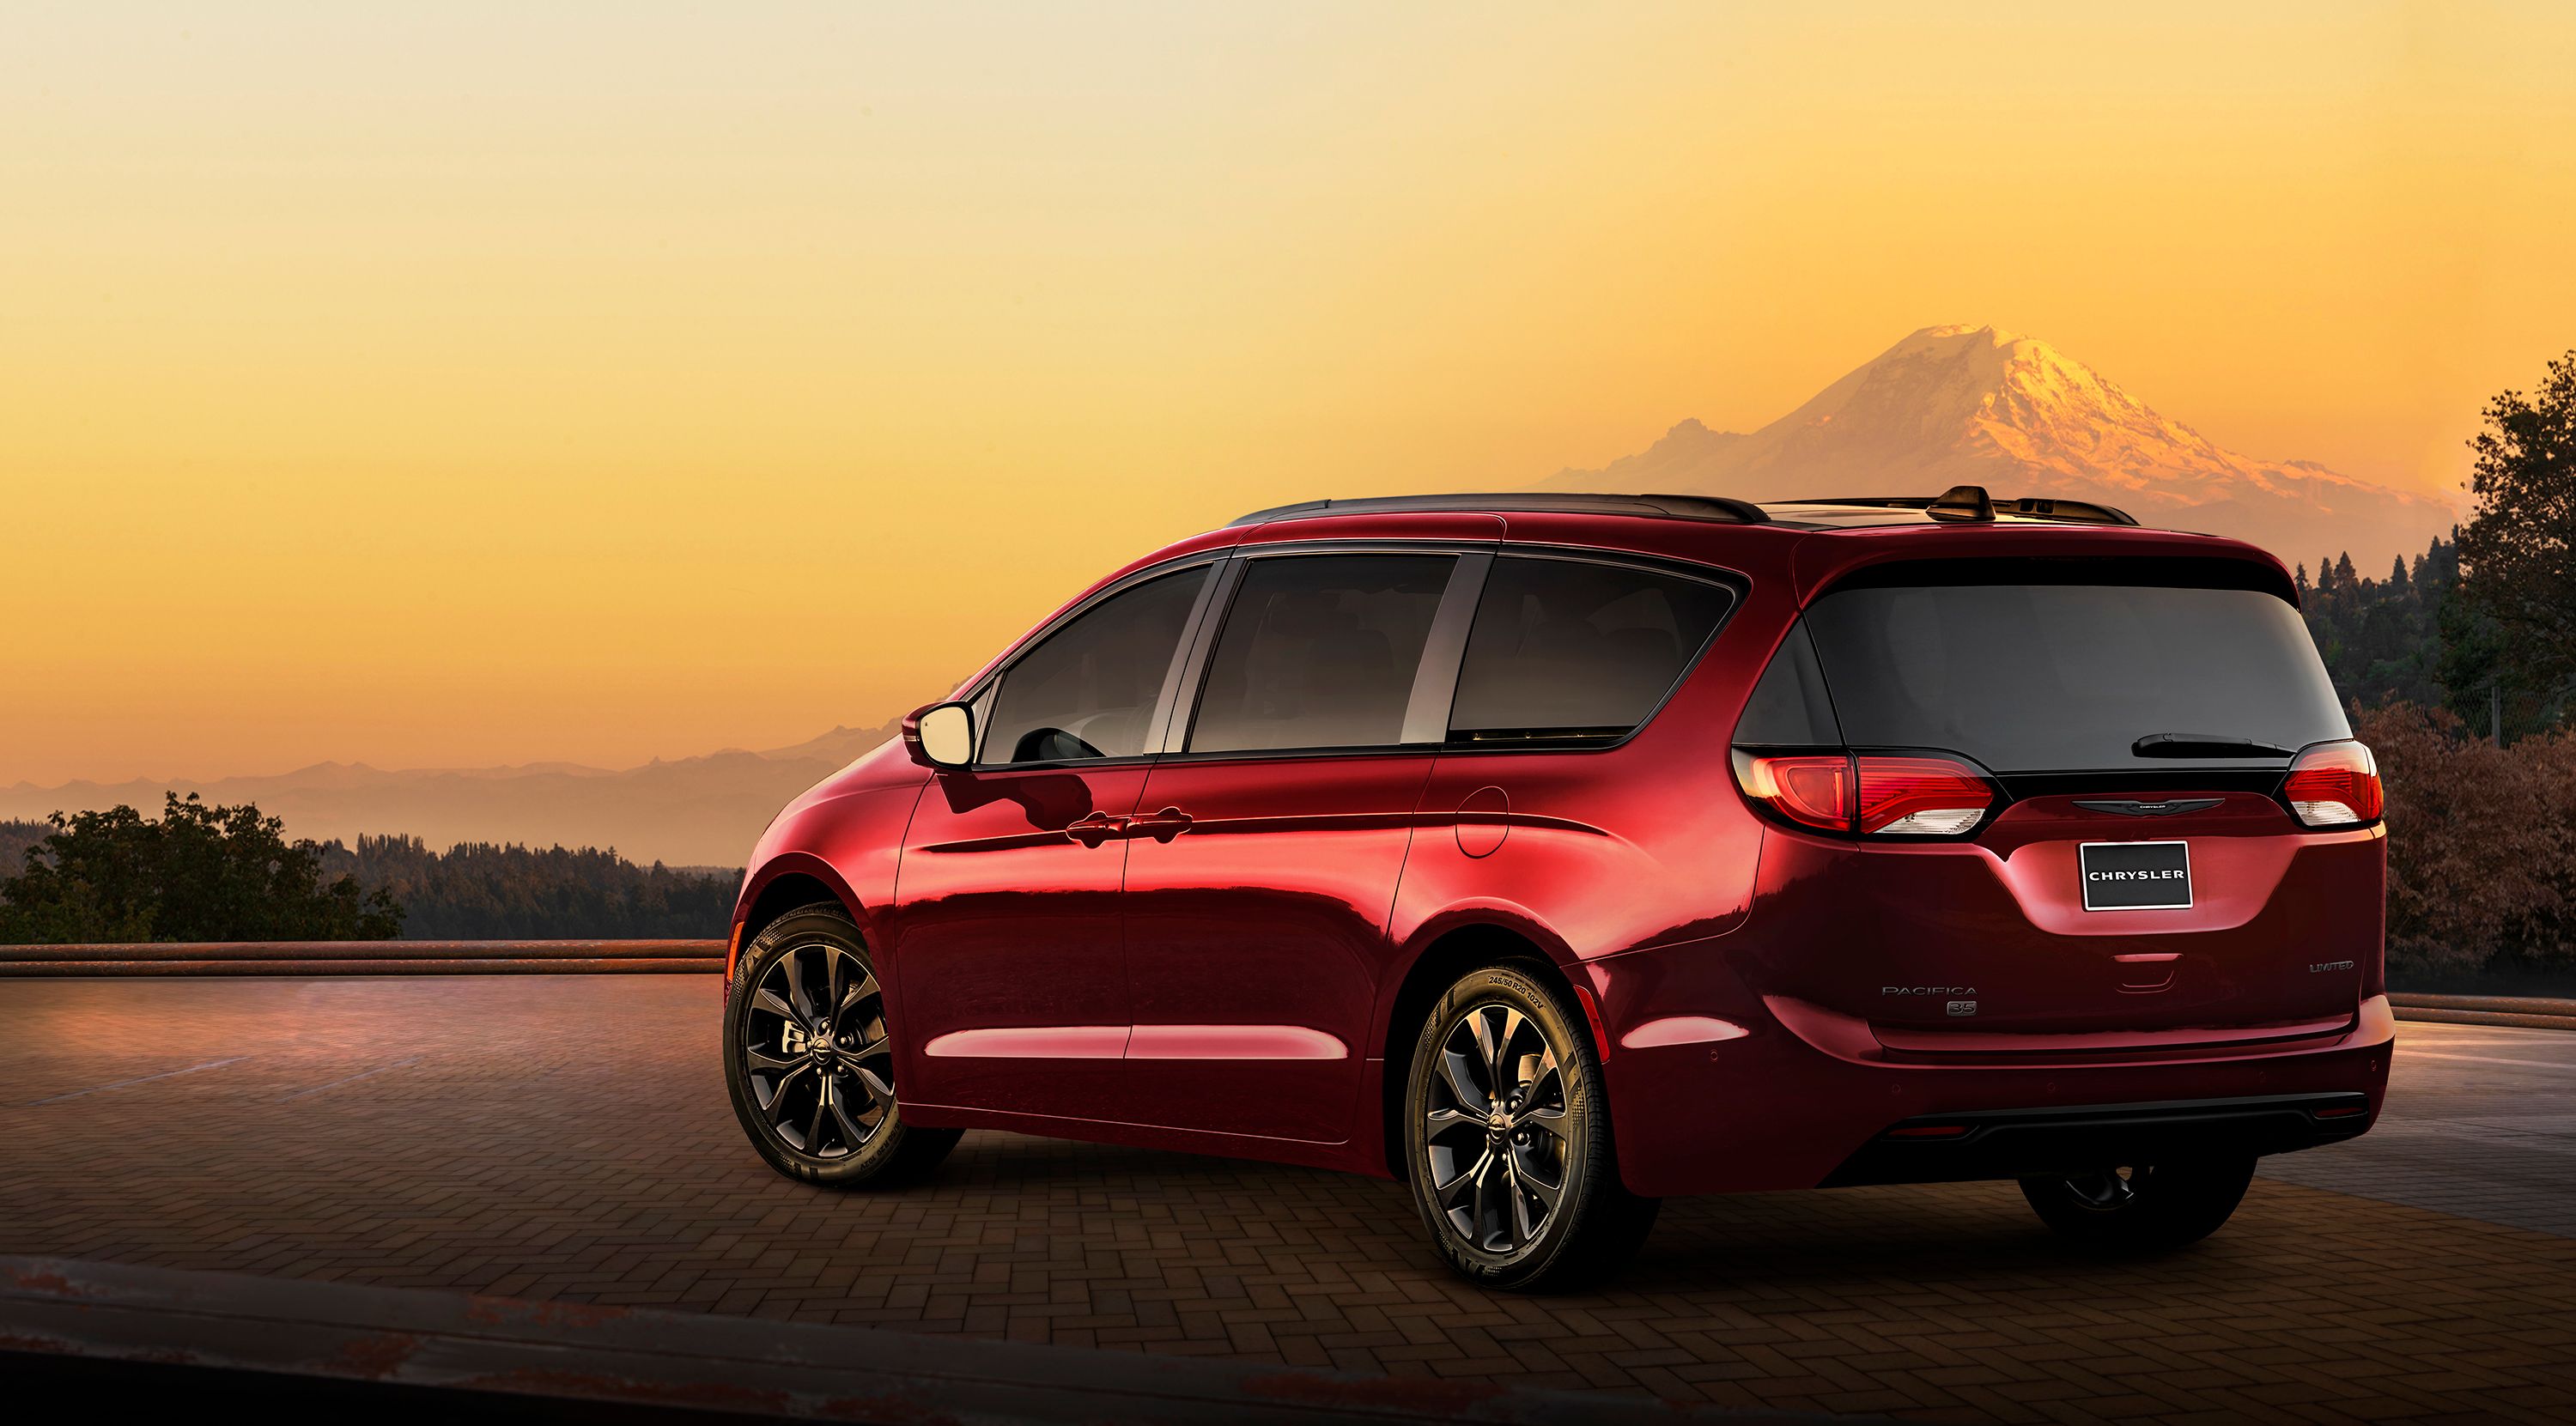 2021 Dodge Emphasizes Its Move Toward Performance As It Kills Off the Grand Caravan and Dodge Journey (Finally)